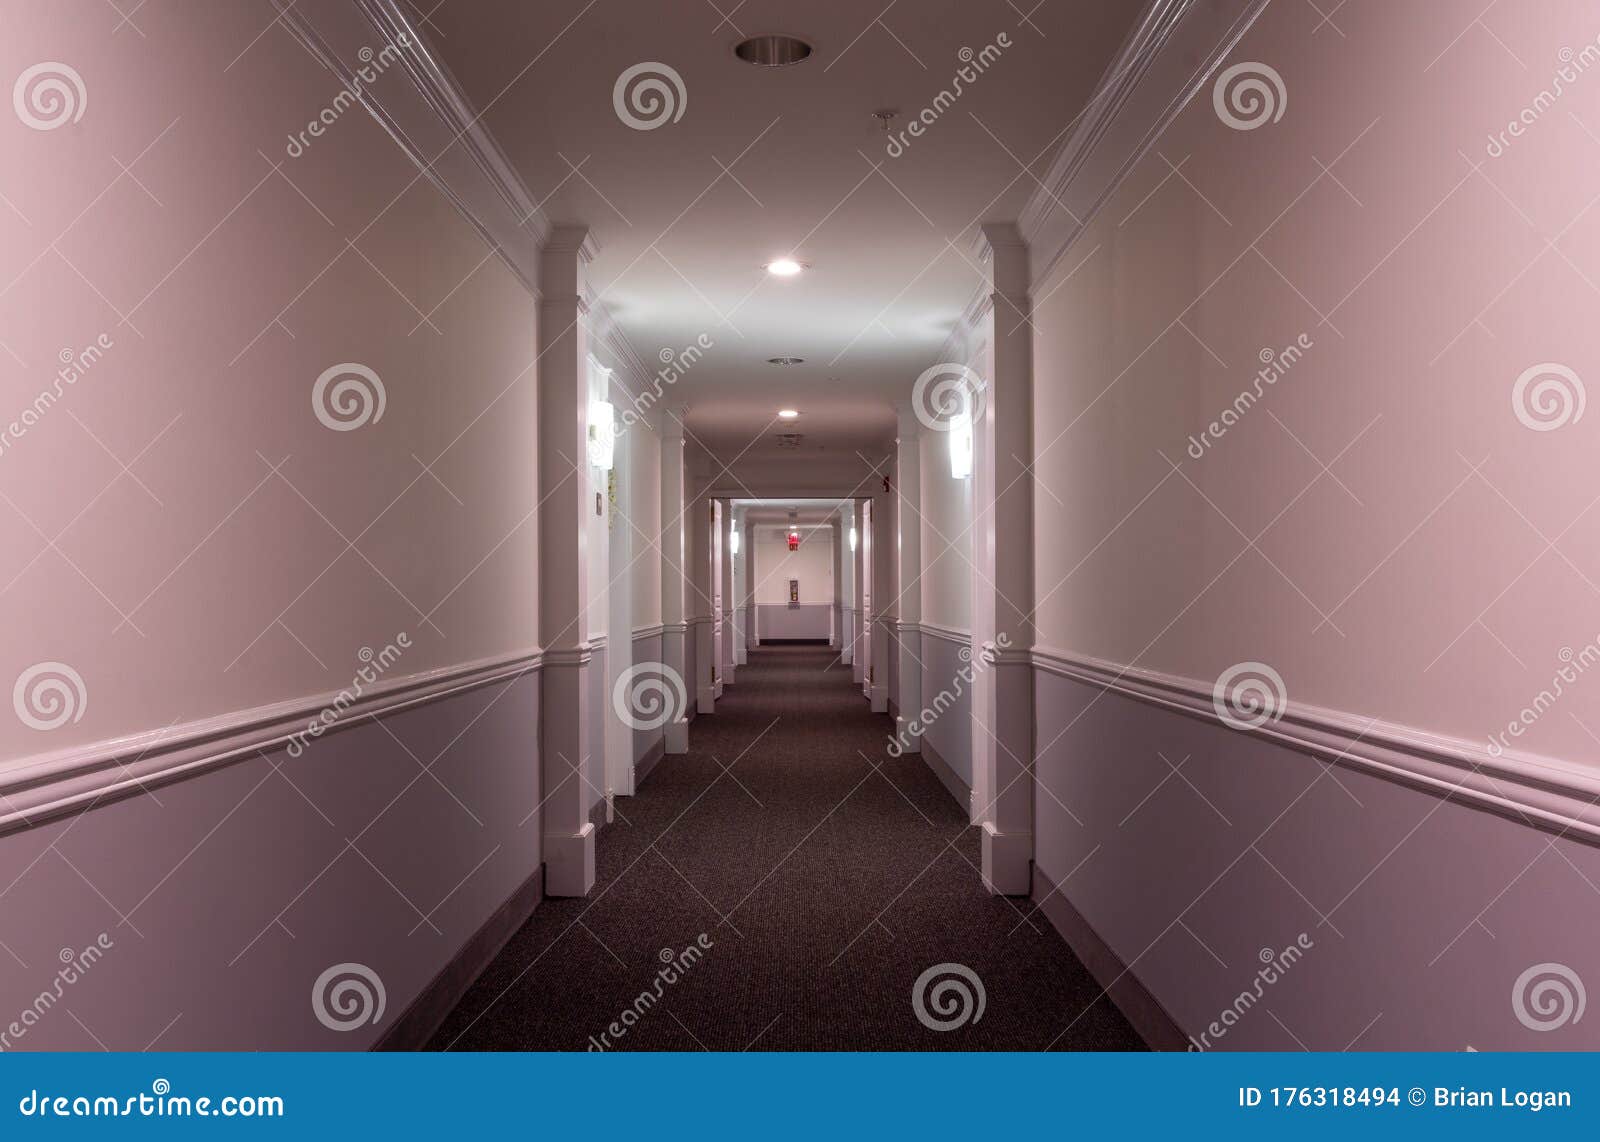 horizontal interior view of the hallway of a modern apartment building; with sconces, doorways, molding, lighting  and carpeting